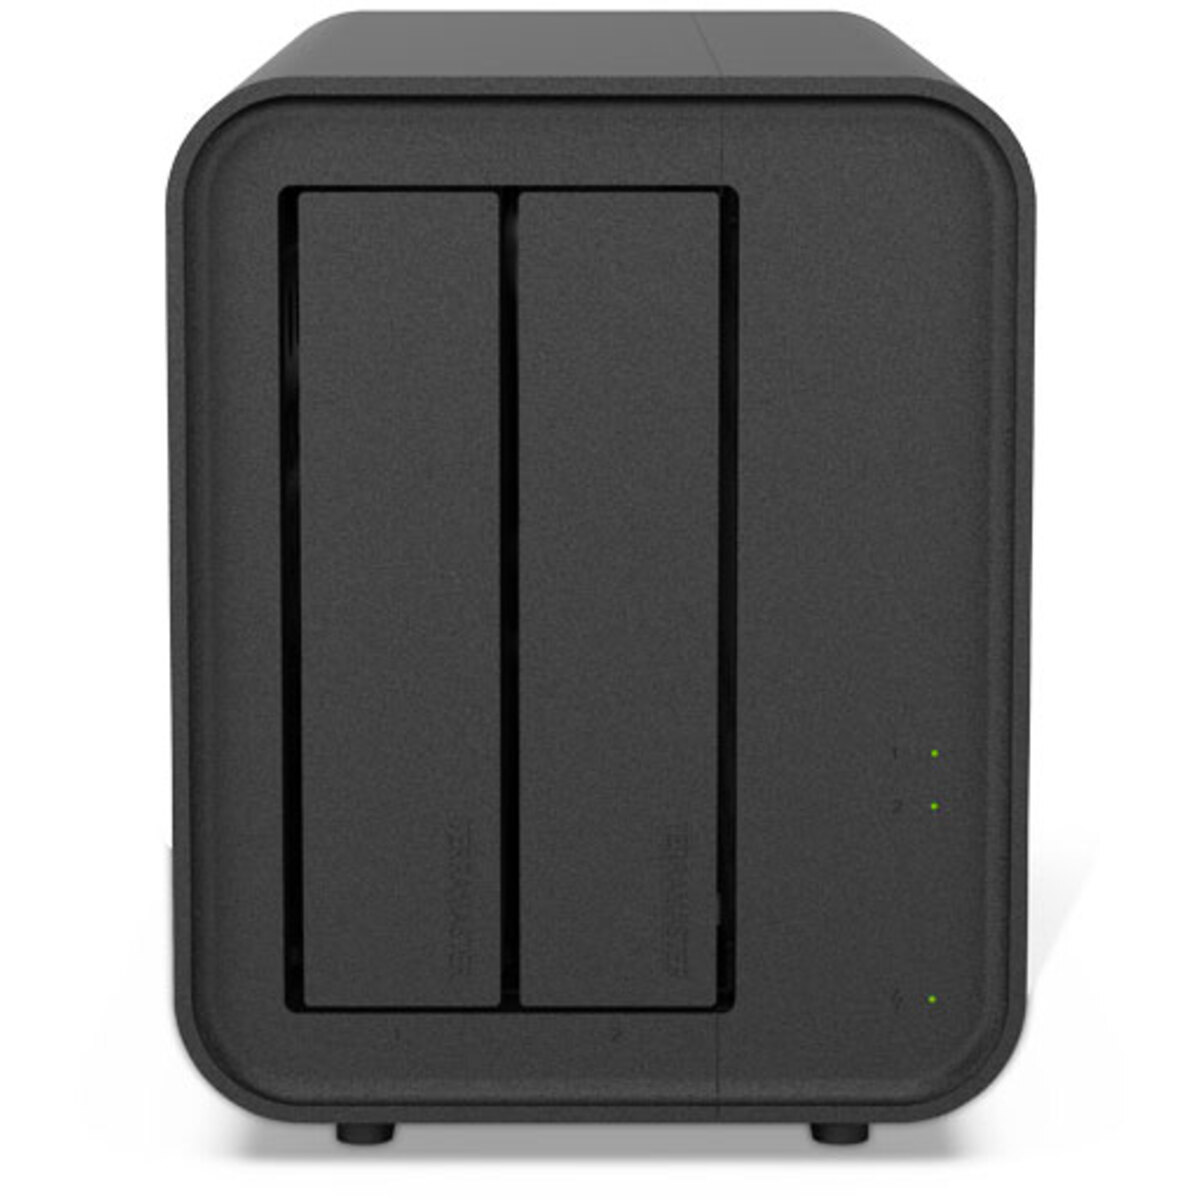 TerraMaster D5 Hybrid 20tb 2-Bay Desktop Multimedia / Power User / Business DAS - Direct Attached Storage Device 2x10tb Seagate IronWolf Pro ST10000NT001 3.5 7200rpm SATA 6Gb/s HDD NAS Class Drives Installed - Burn-In Tested - ON SALE D5 Hybrid